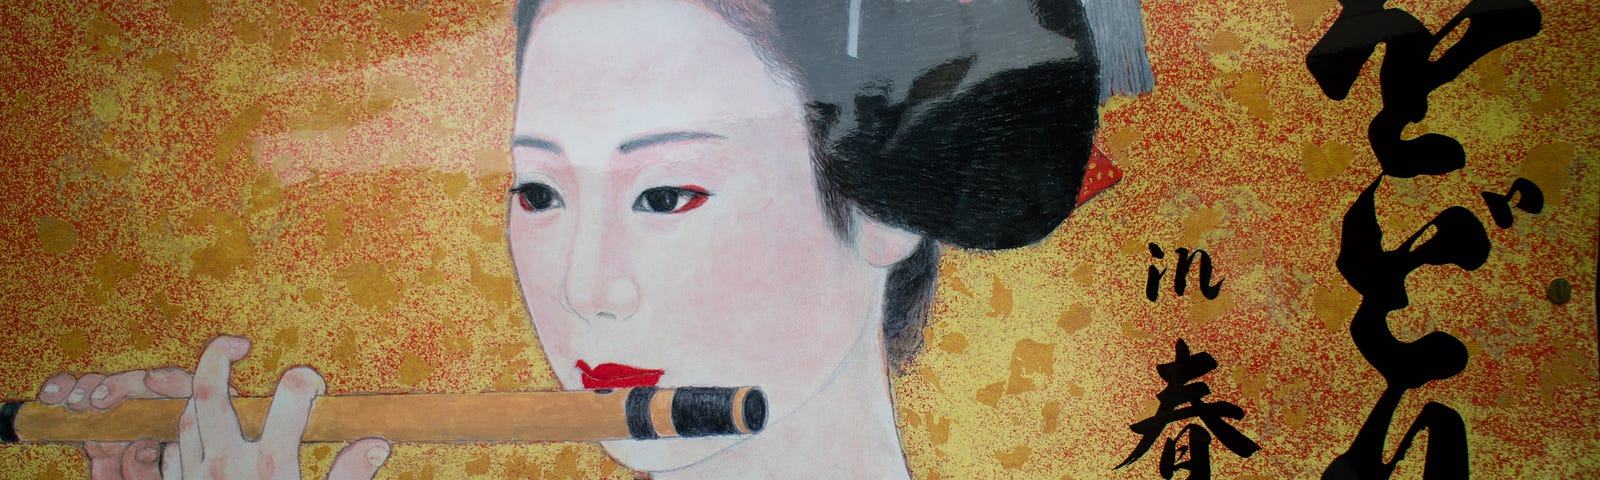 A painting of a geisha playing a flute. The background is a blend of yellow, gold fading into a green shade. There is caligraphy, Japanese writing on the right side of the picture. The geisha is dressed in a blue kimono robe. Her hair is pulled up in a bun and deocrated with red flowers.